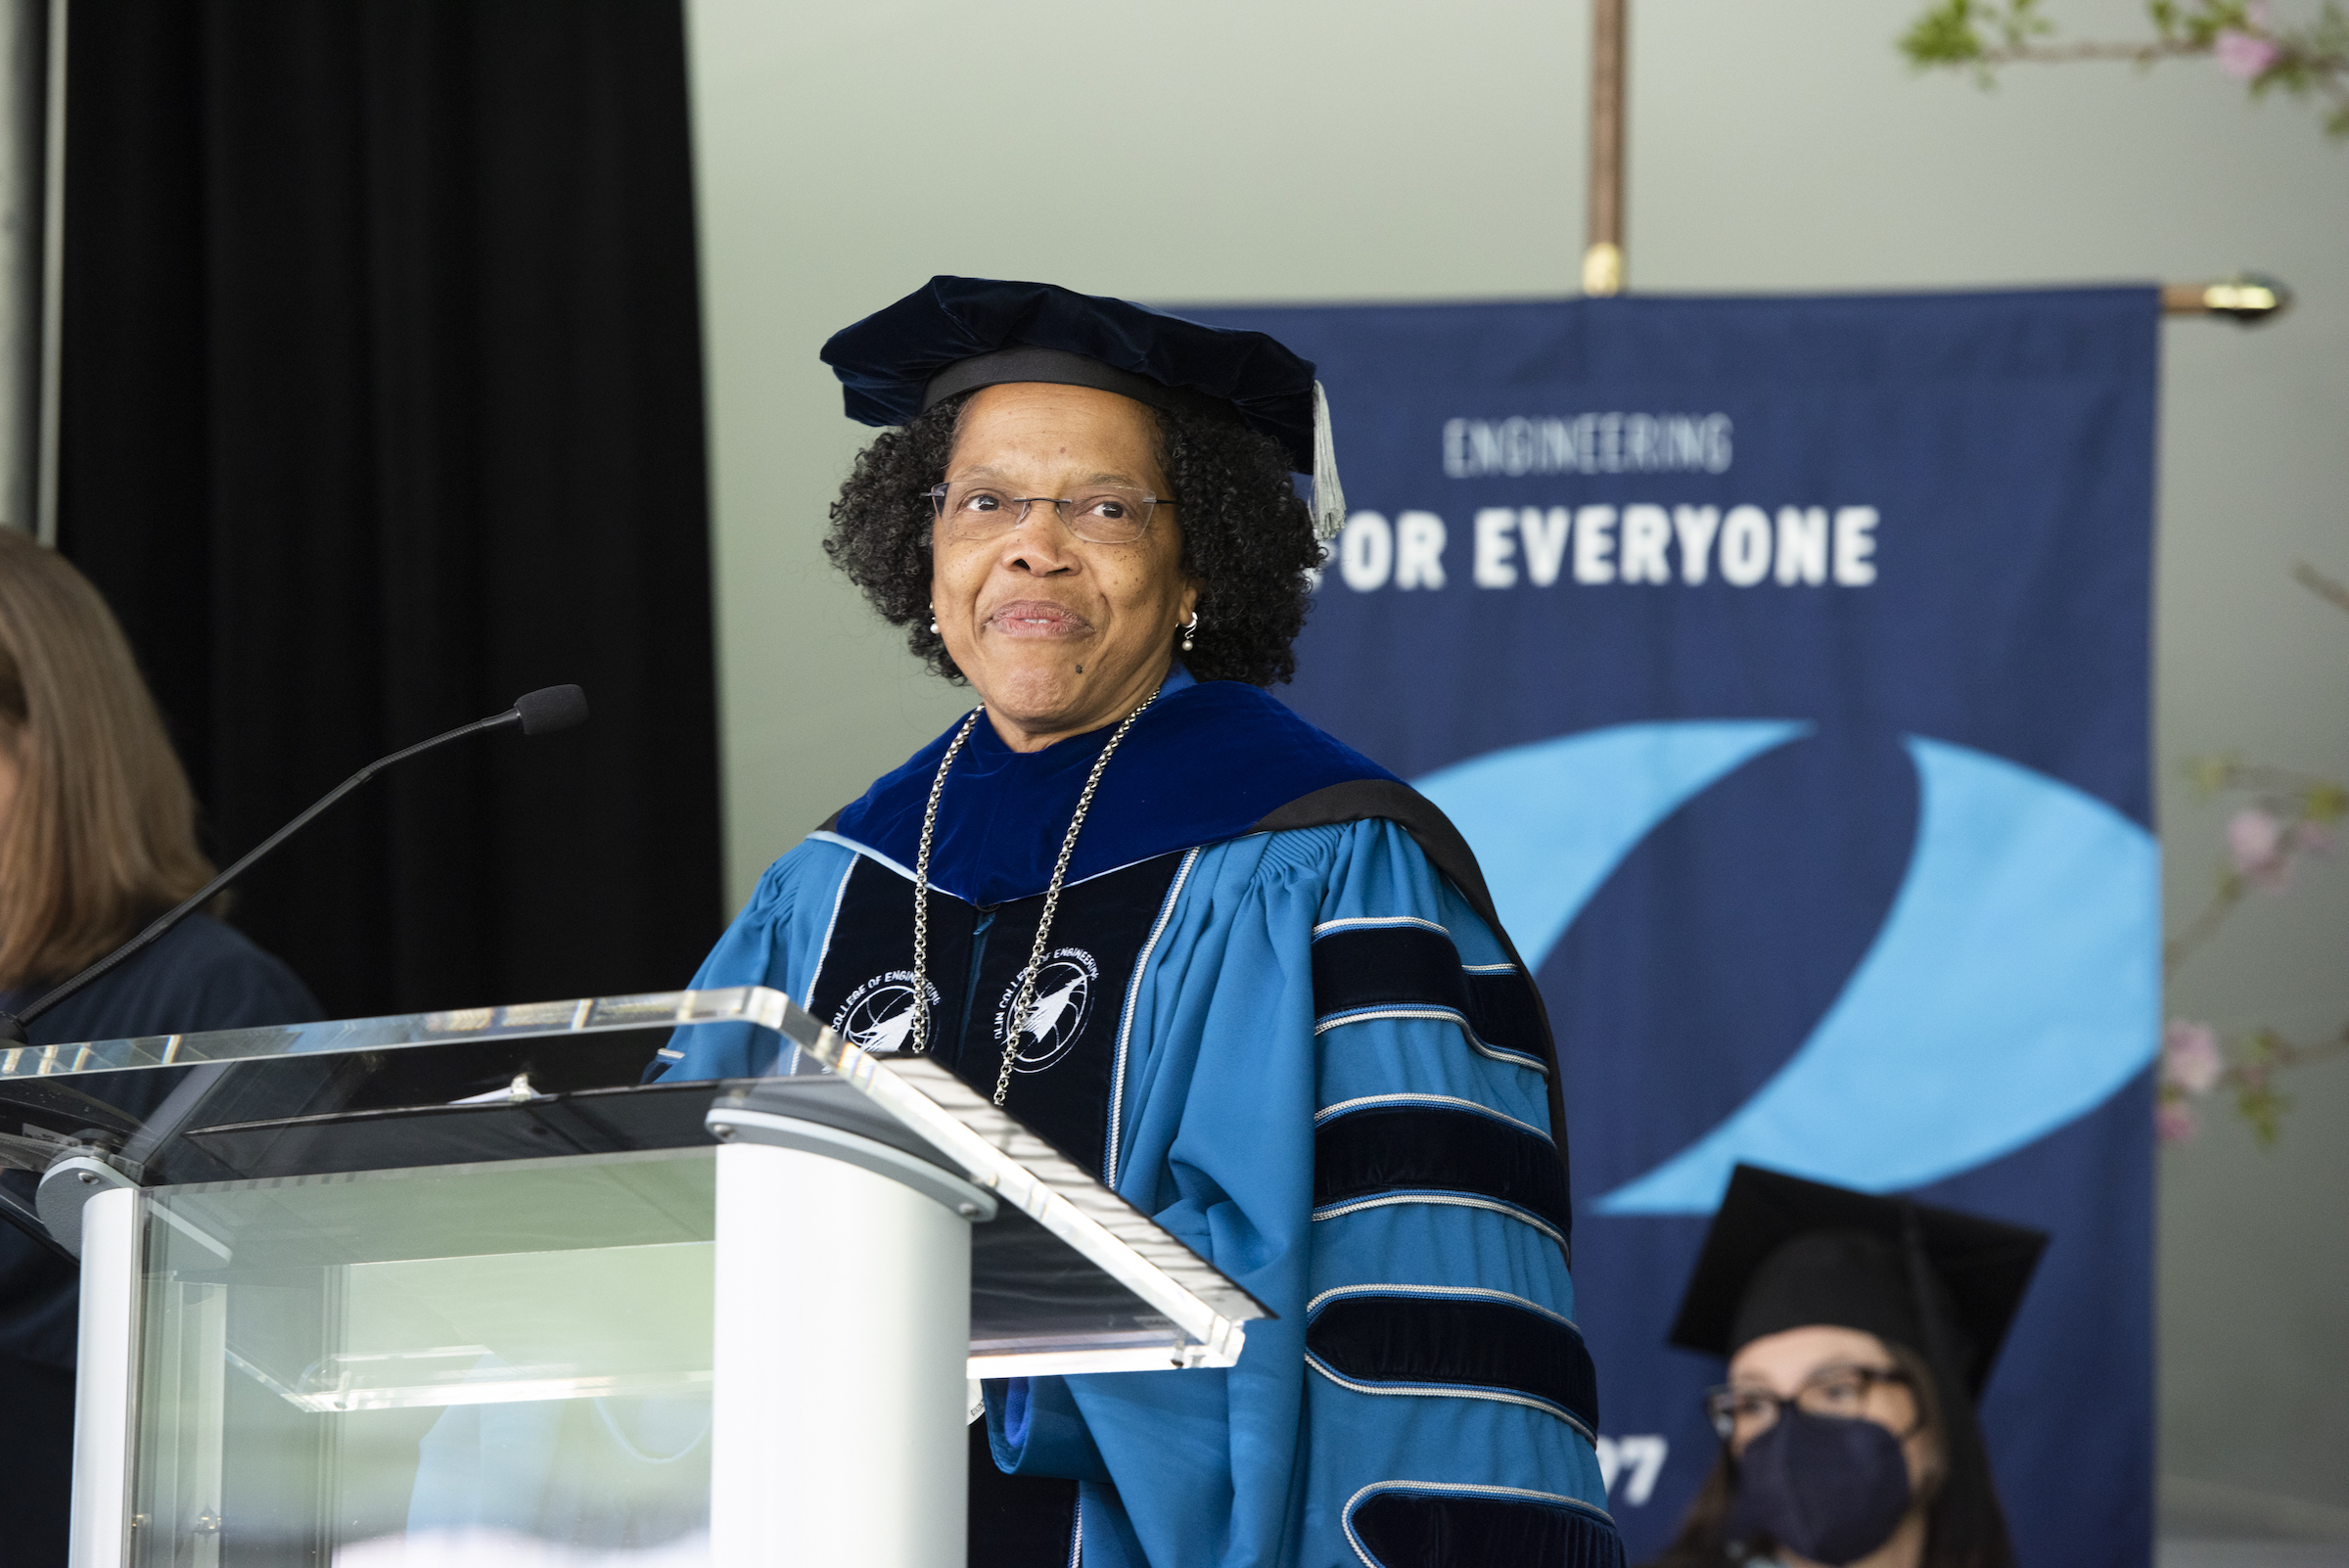 Olin President Gilda Barabino stands at the podium during her Inauguration ceremony on May 2022.